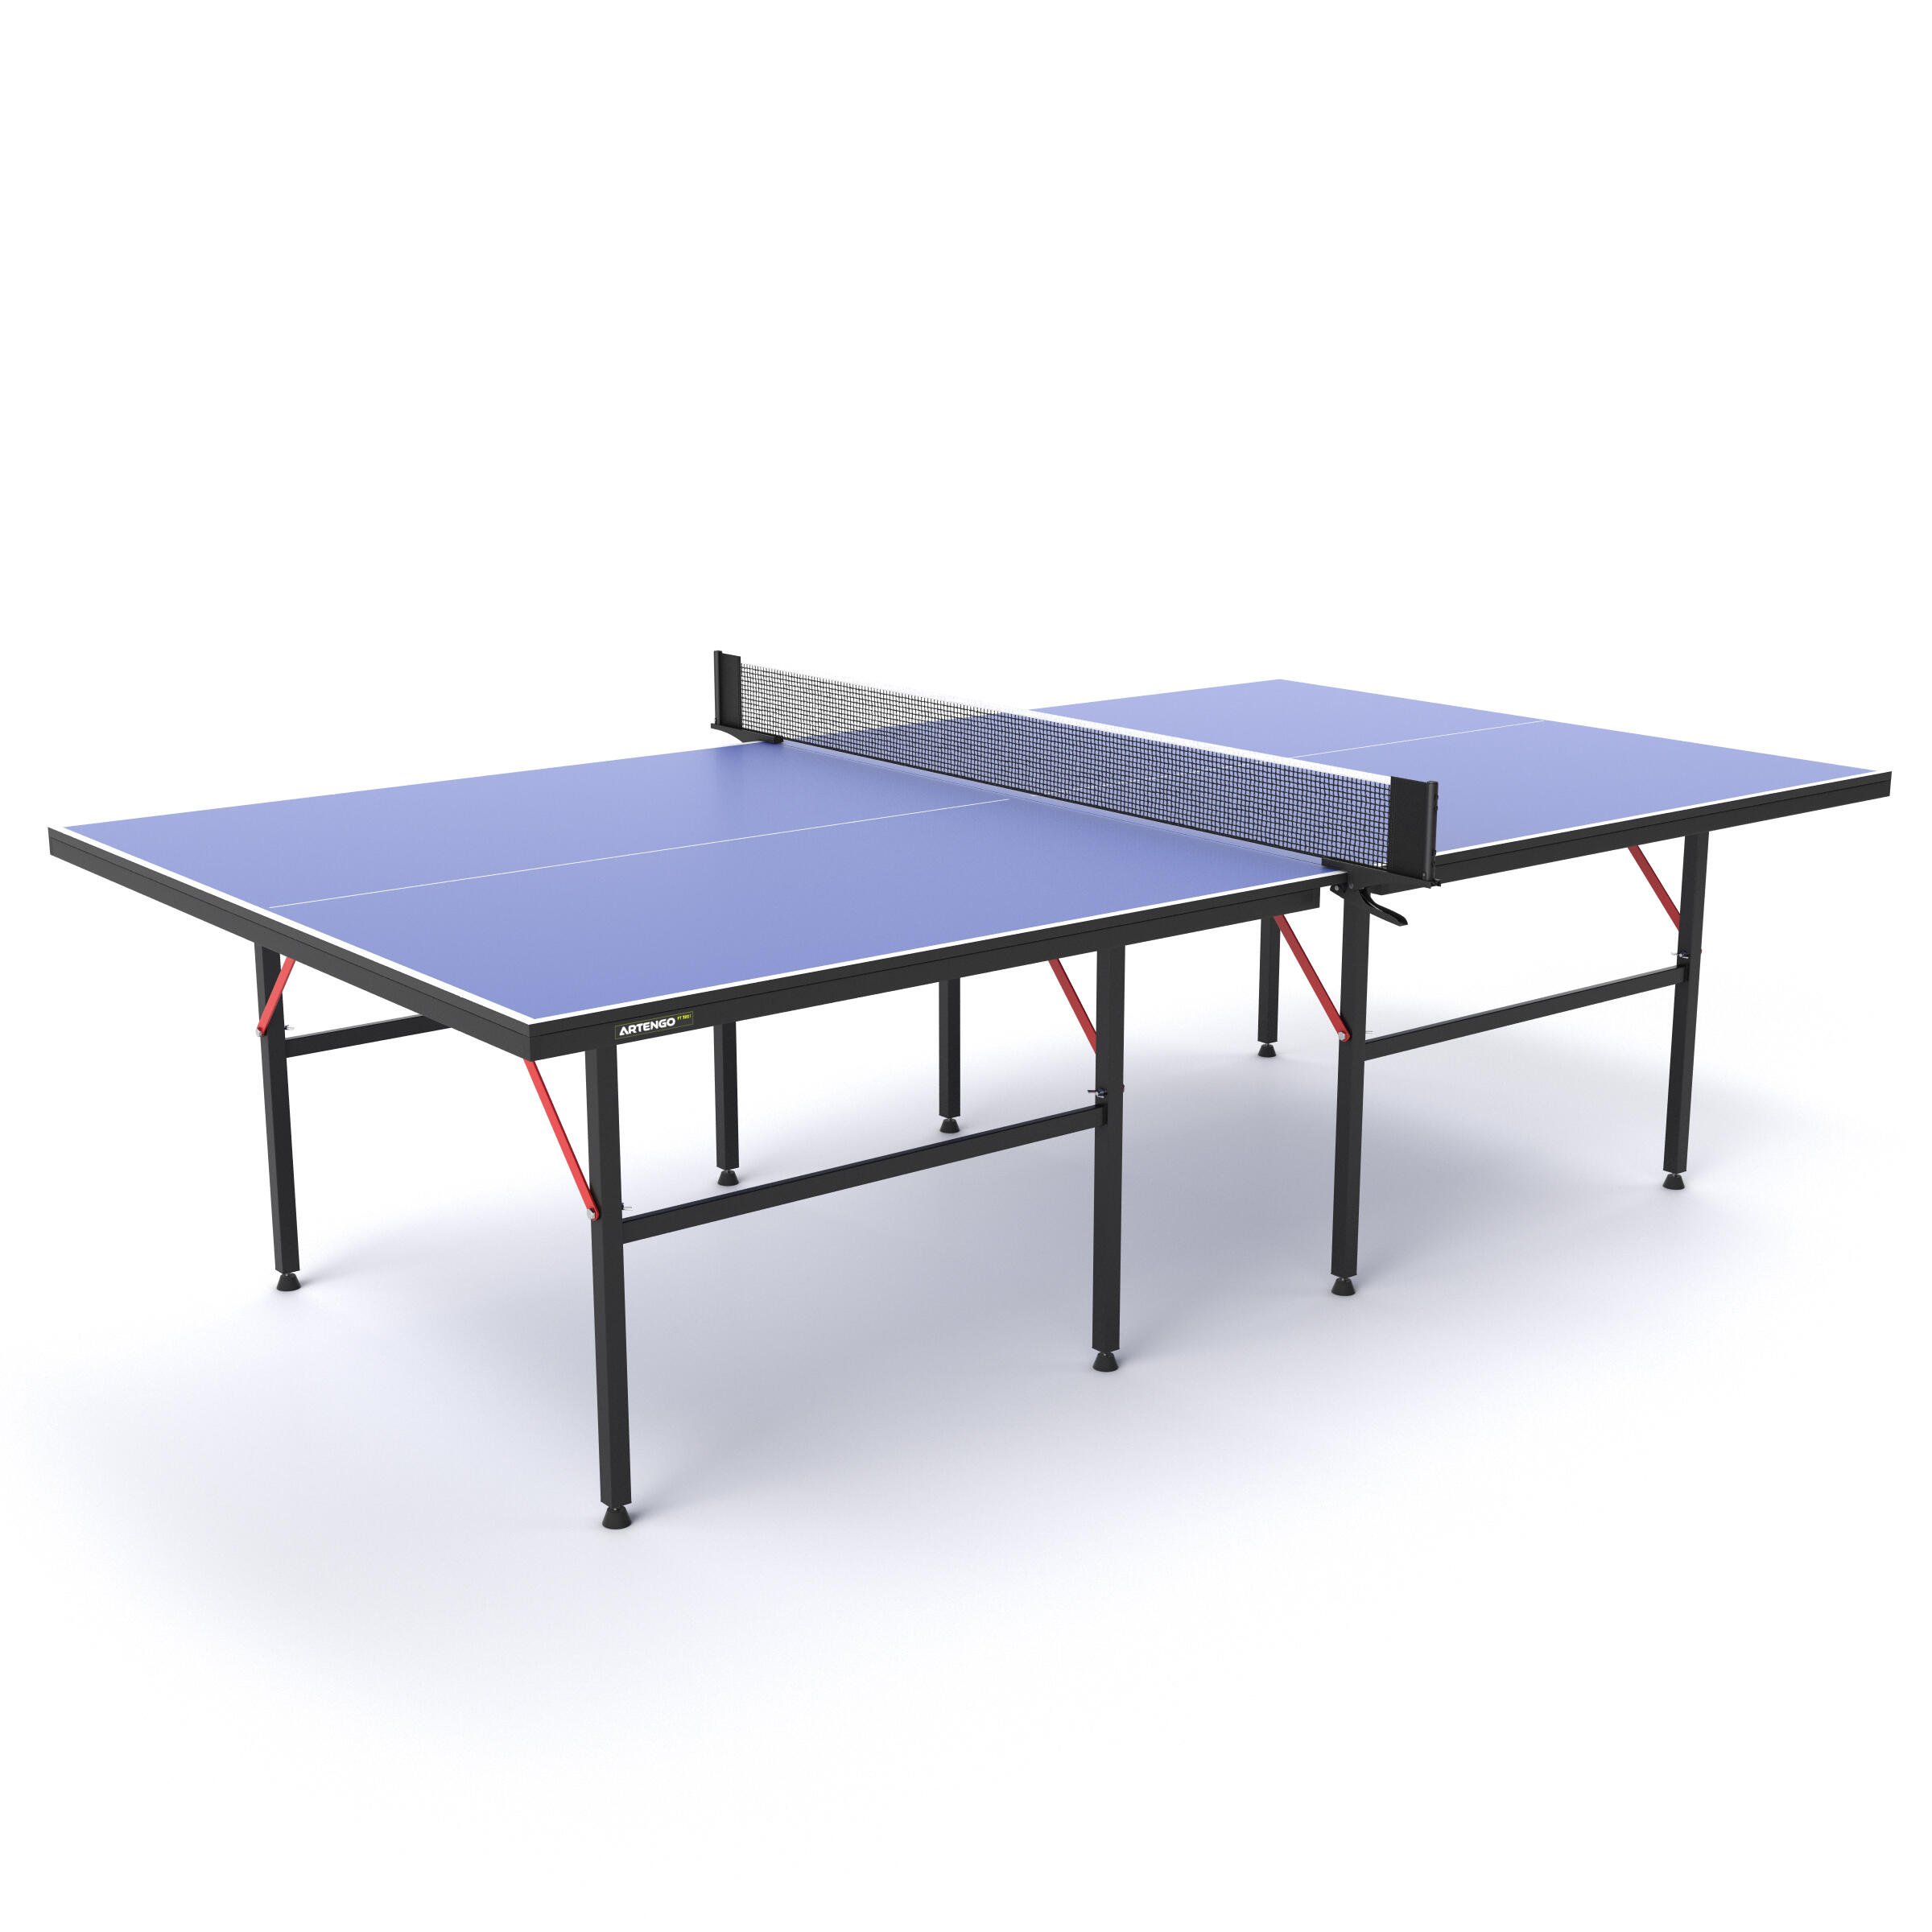 FT 720 Indoor Free Table Tennis Table 